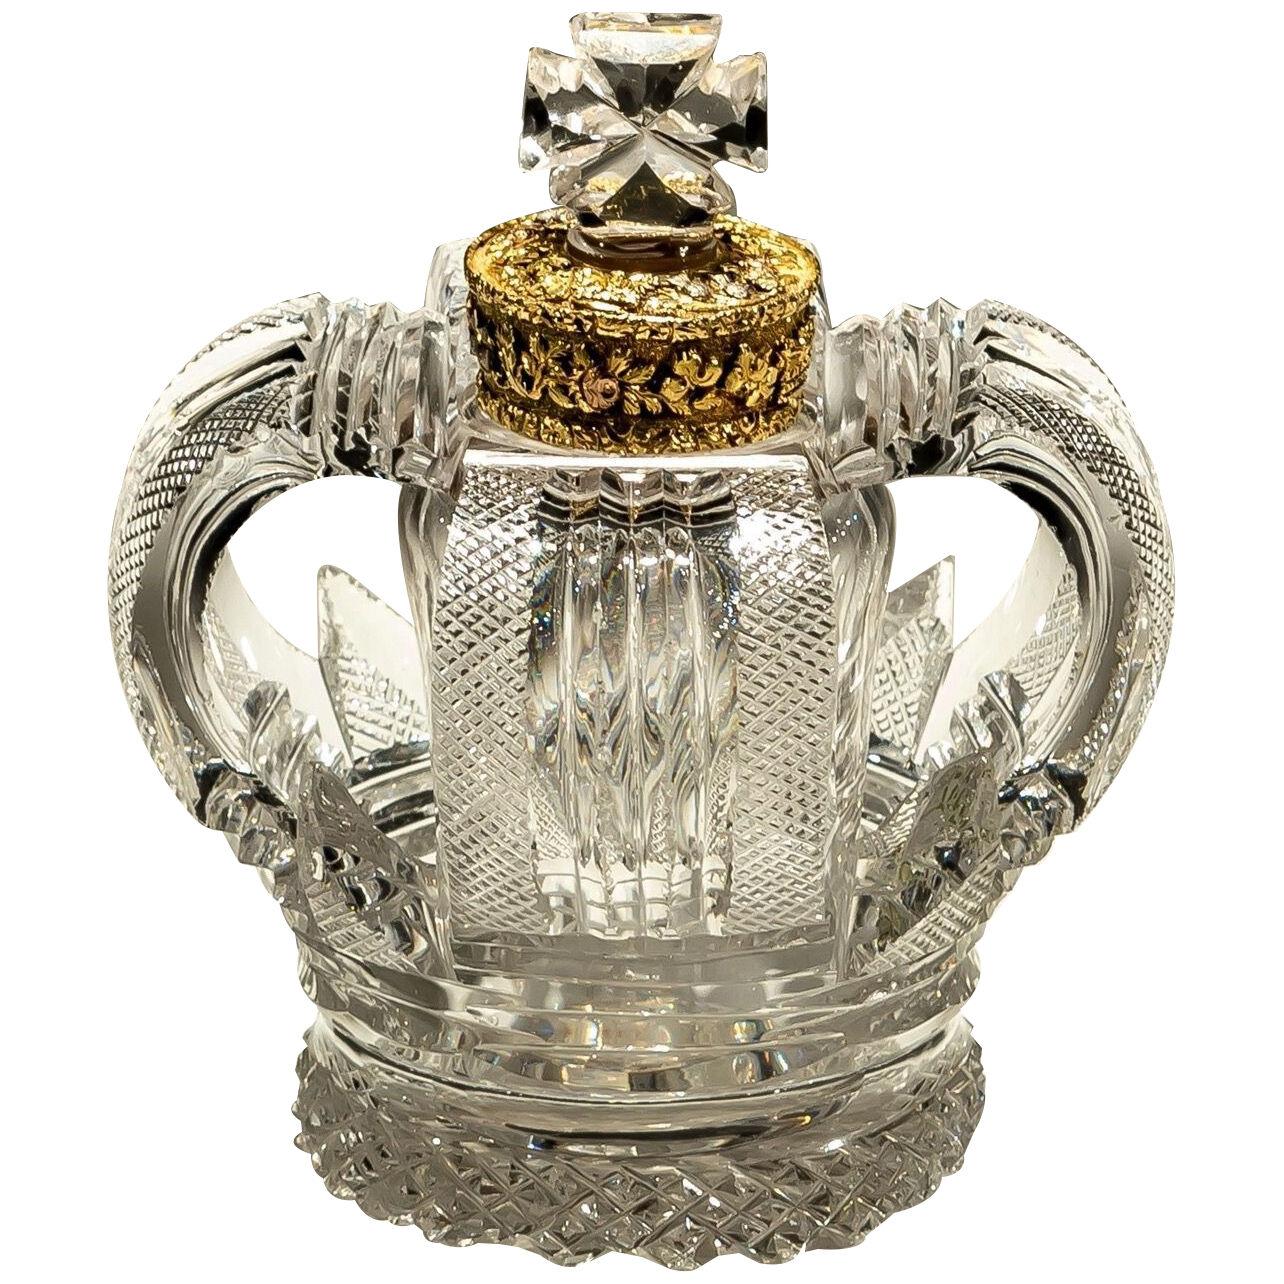 A VERY ELEGANTLY MOUNTED CROWN SCENT BOTTLE